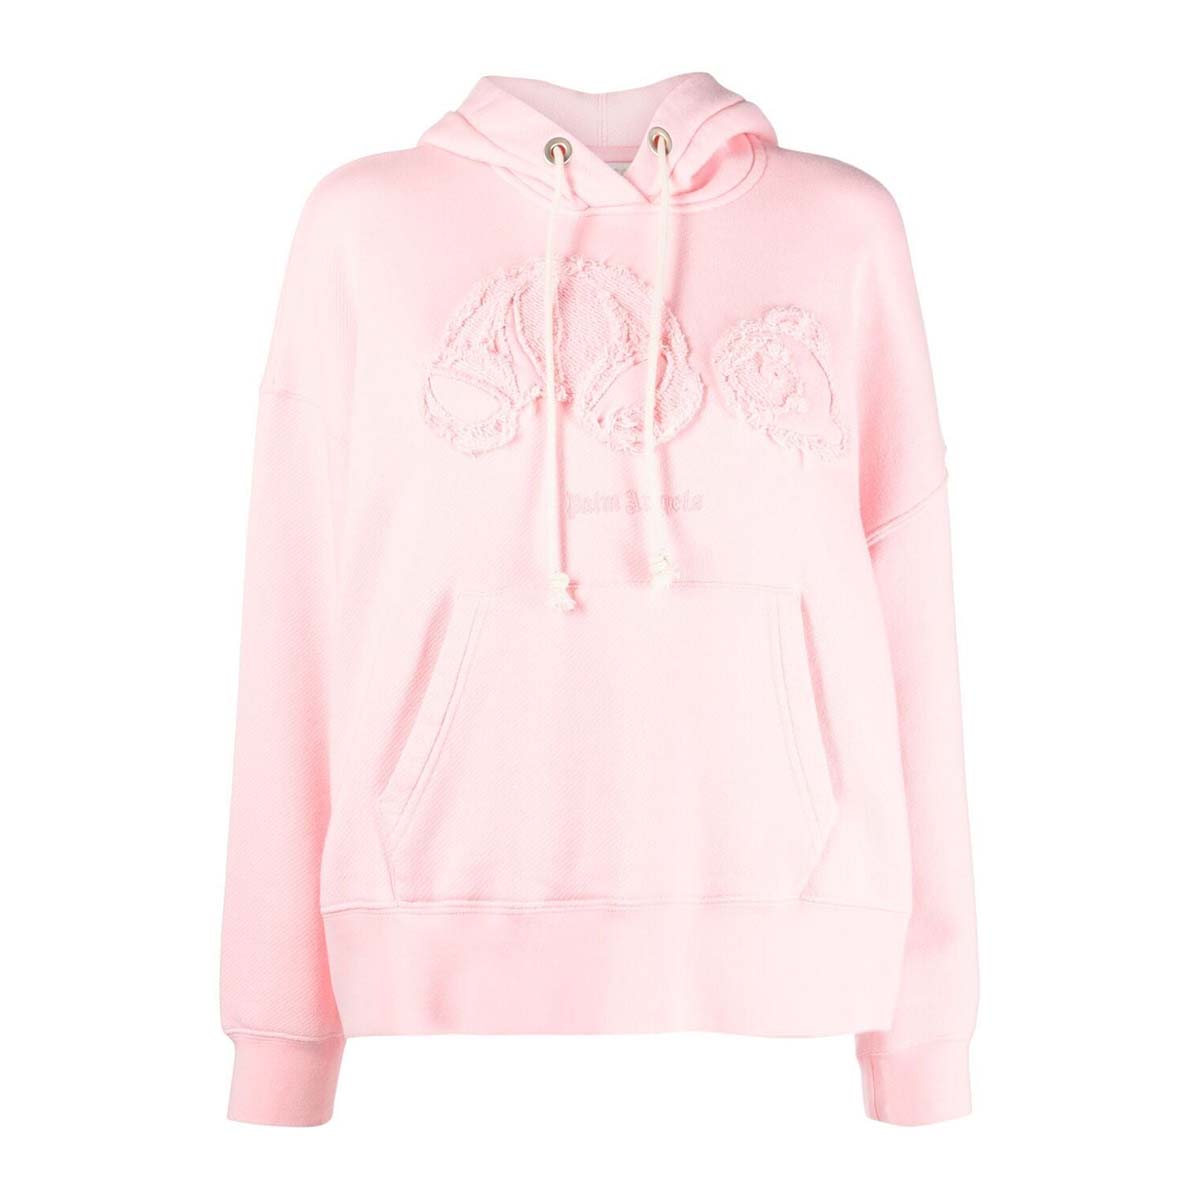 Embroidered bear hoodie pink